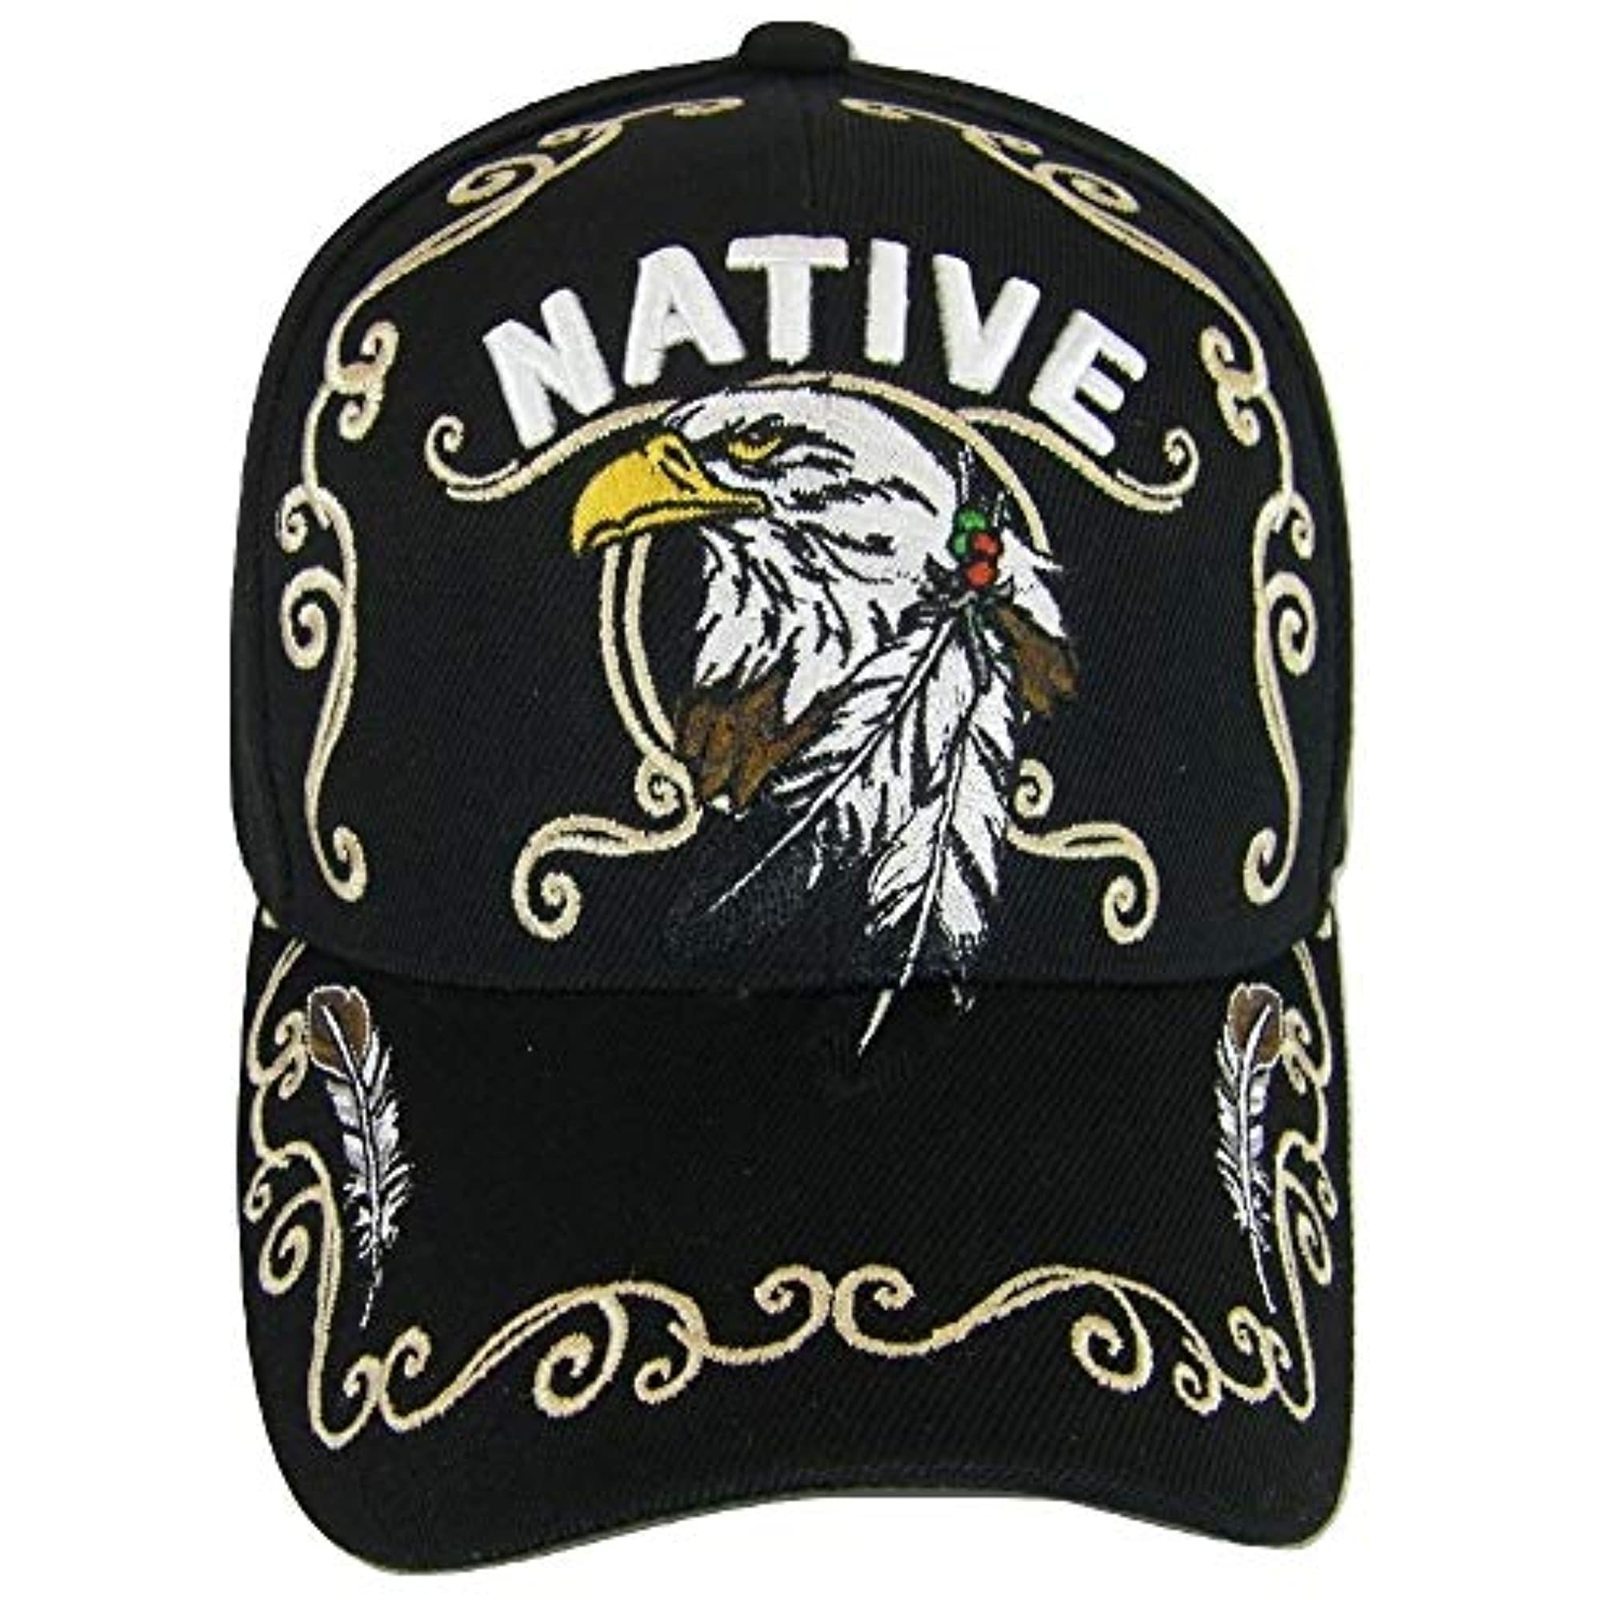 Ez Cap - Native pride eagle adjustable baseball cap with feathers and swirls (black)